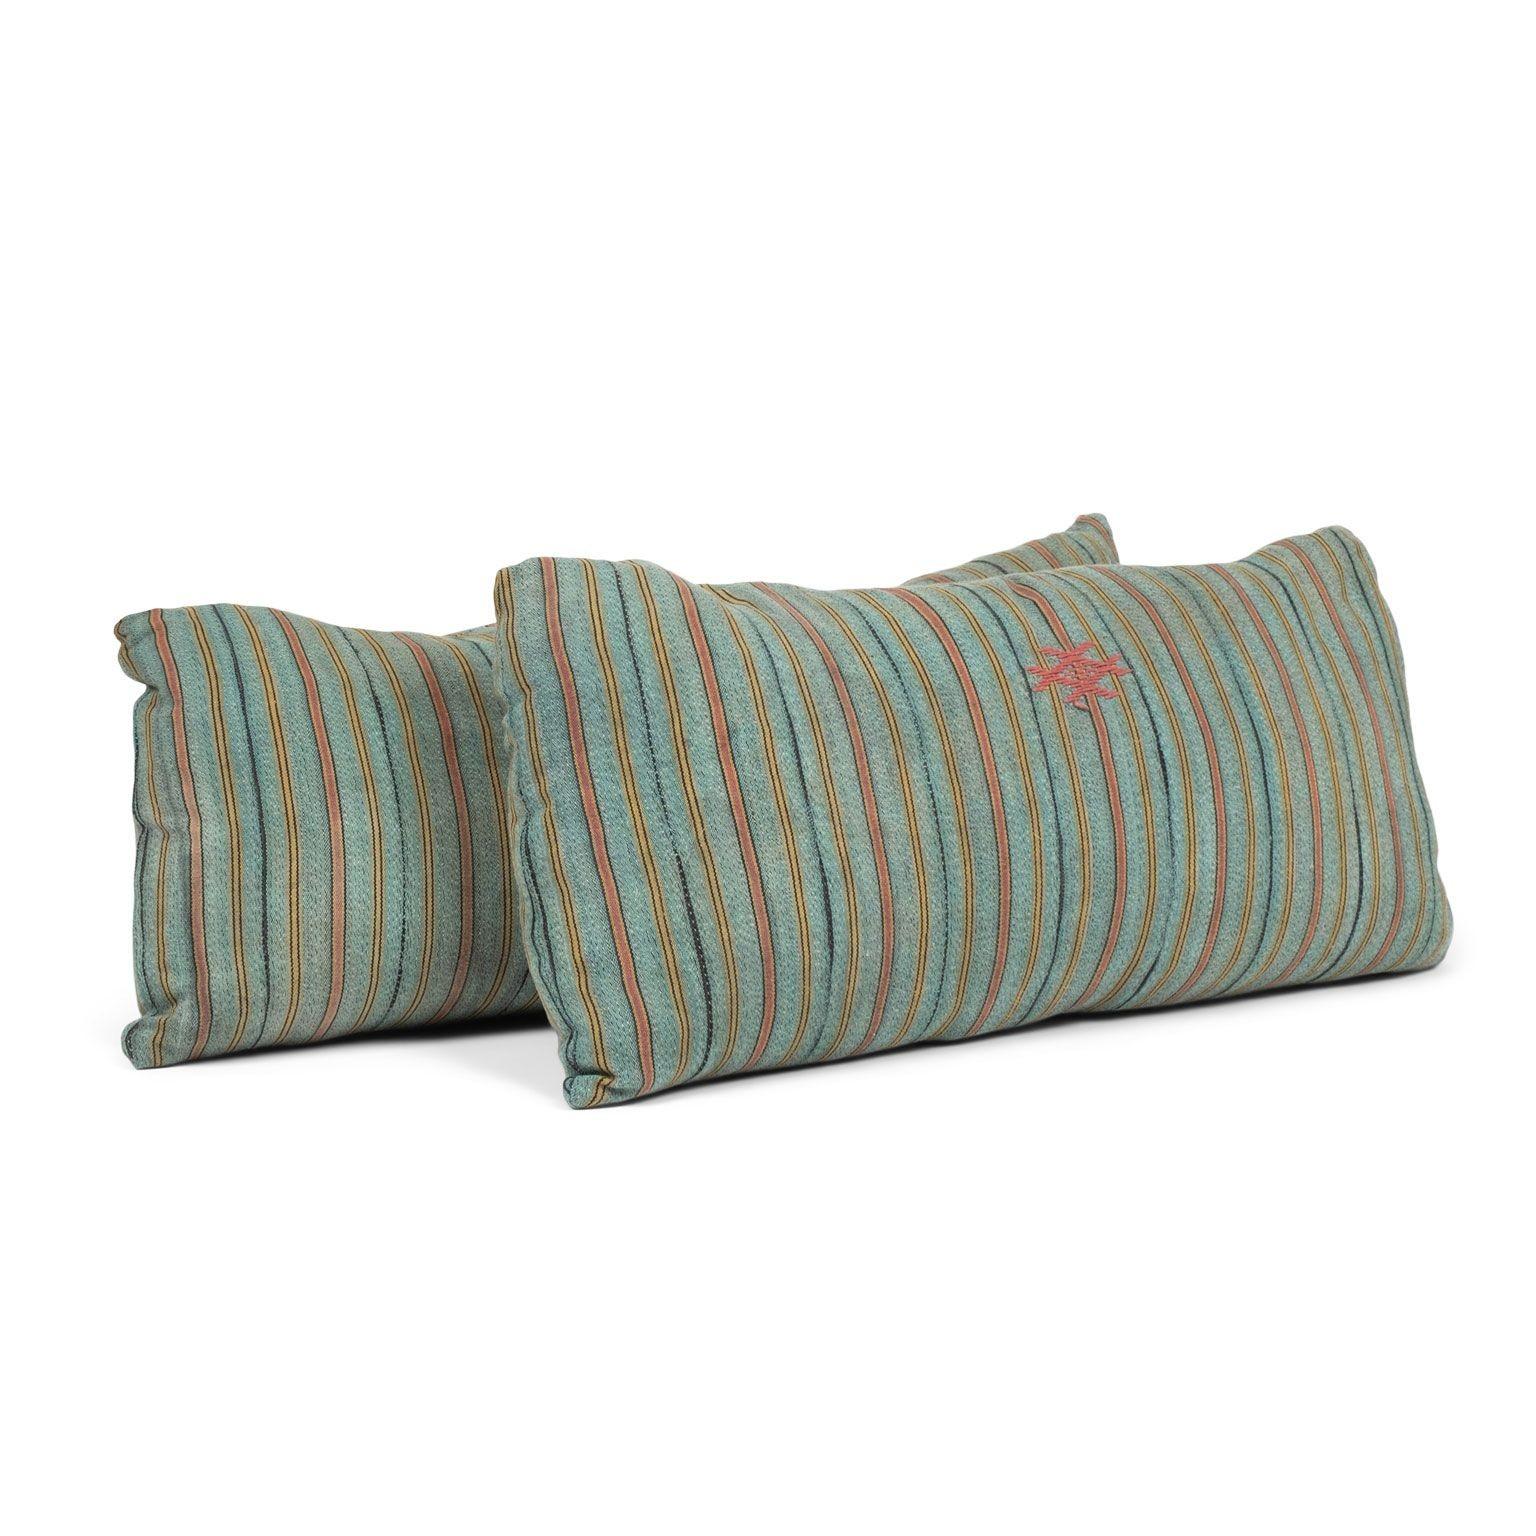 Cast Large Teal, Gold, Navy and Coral Striped Print Lumbar Cushion For Sale